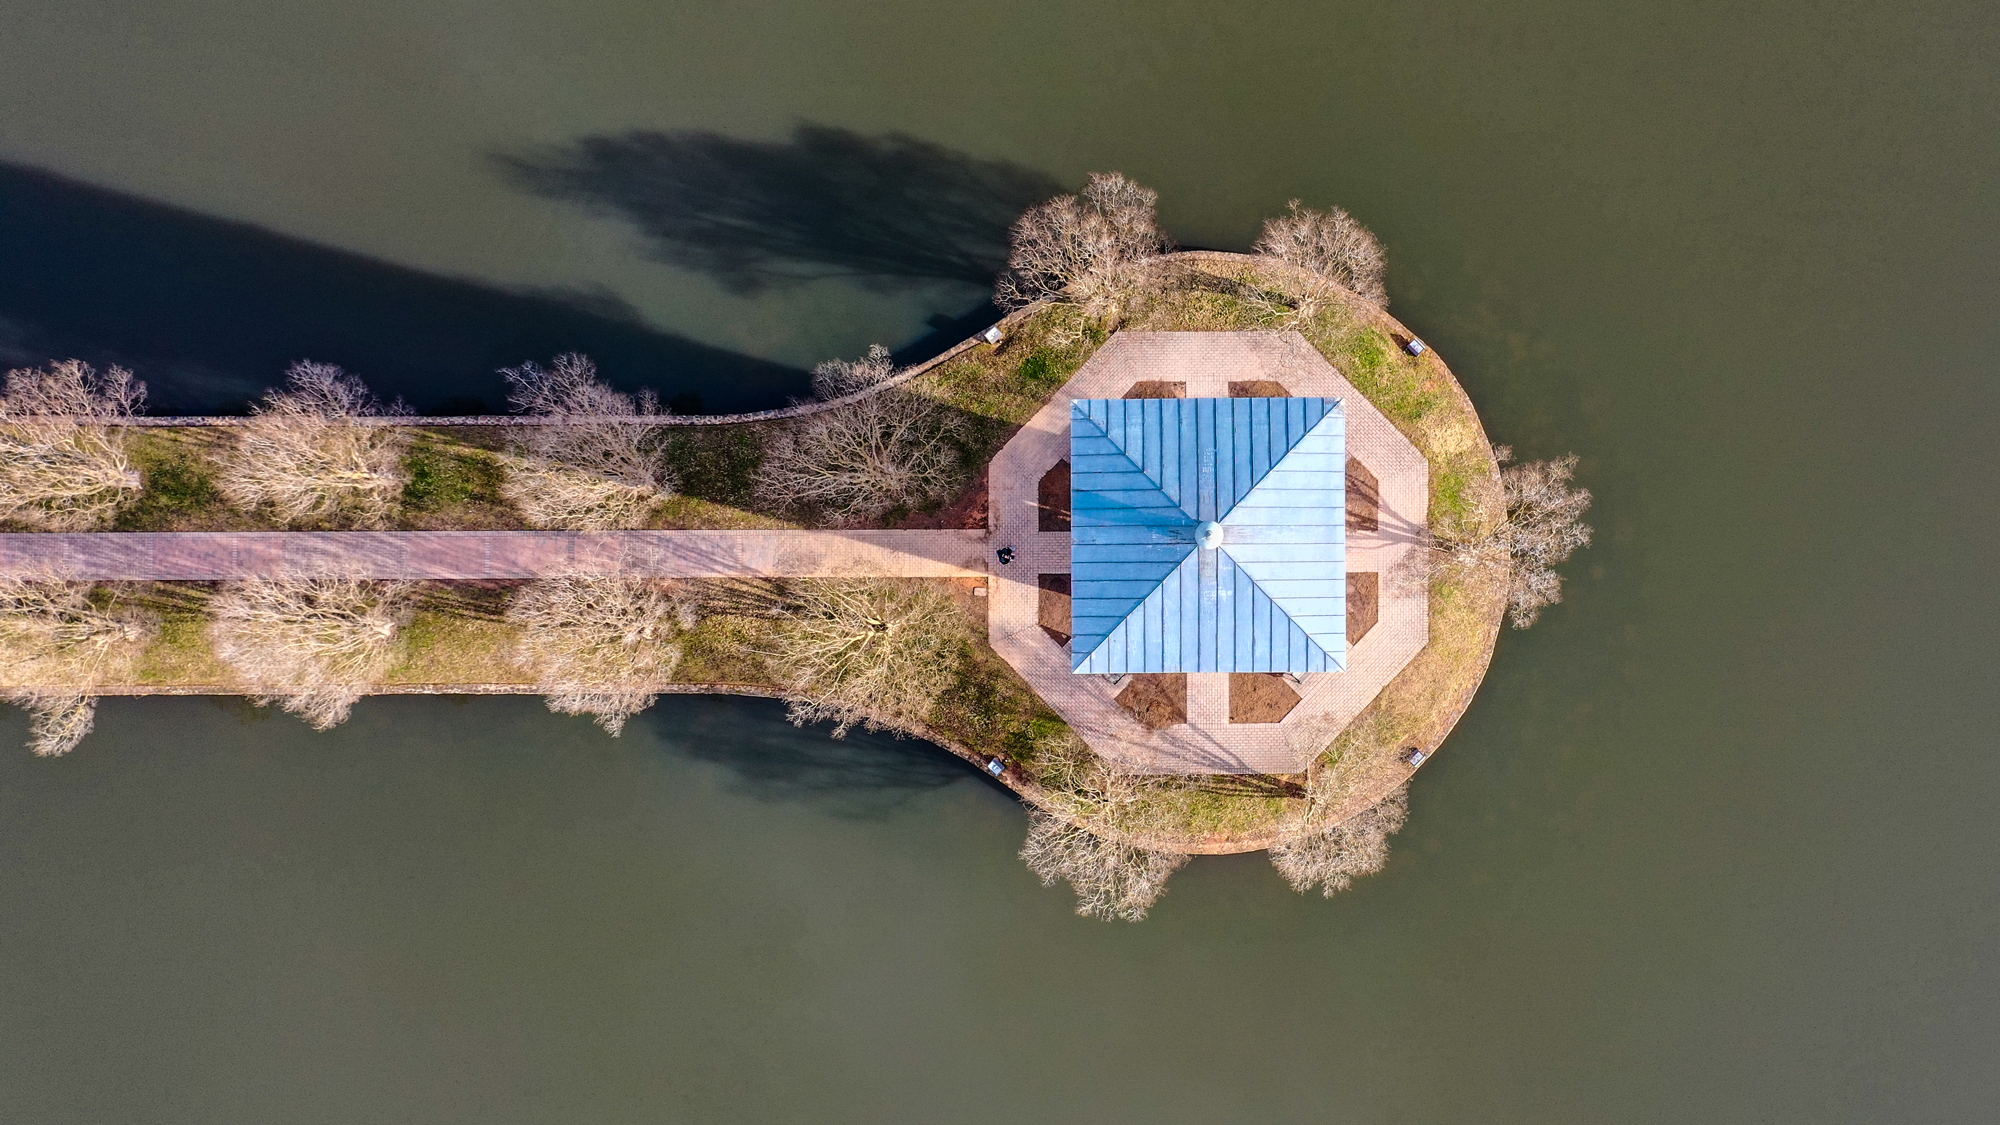 Ariel view of the furman bell tower